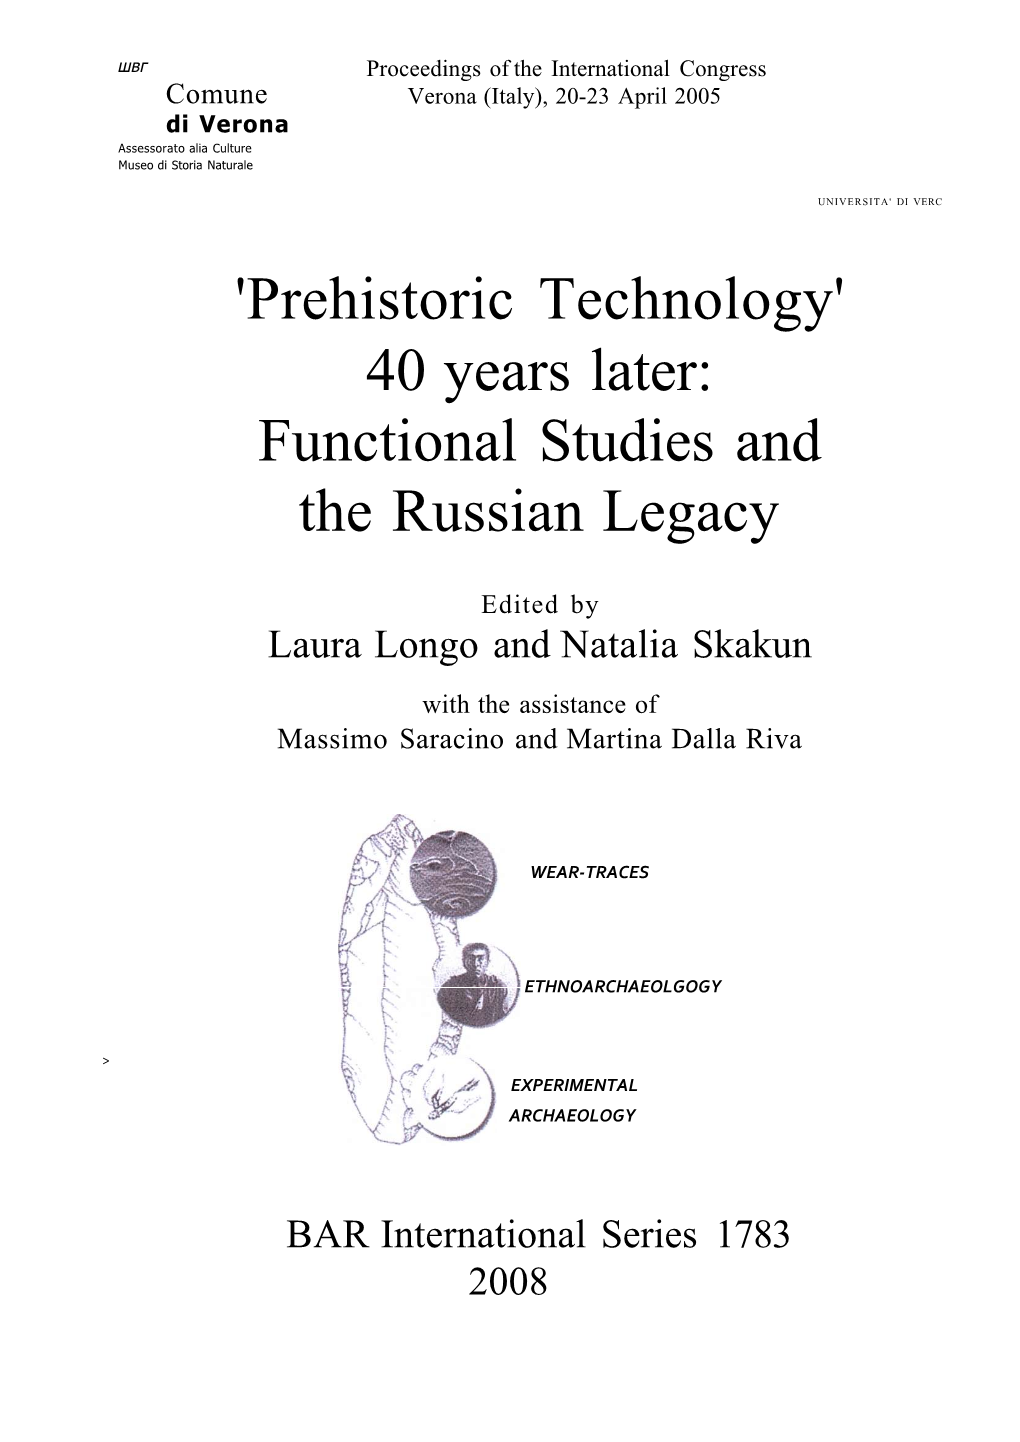 'Prehistoric Technology' 40 Years Later: Functional Studies and the Russian Legacy